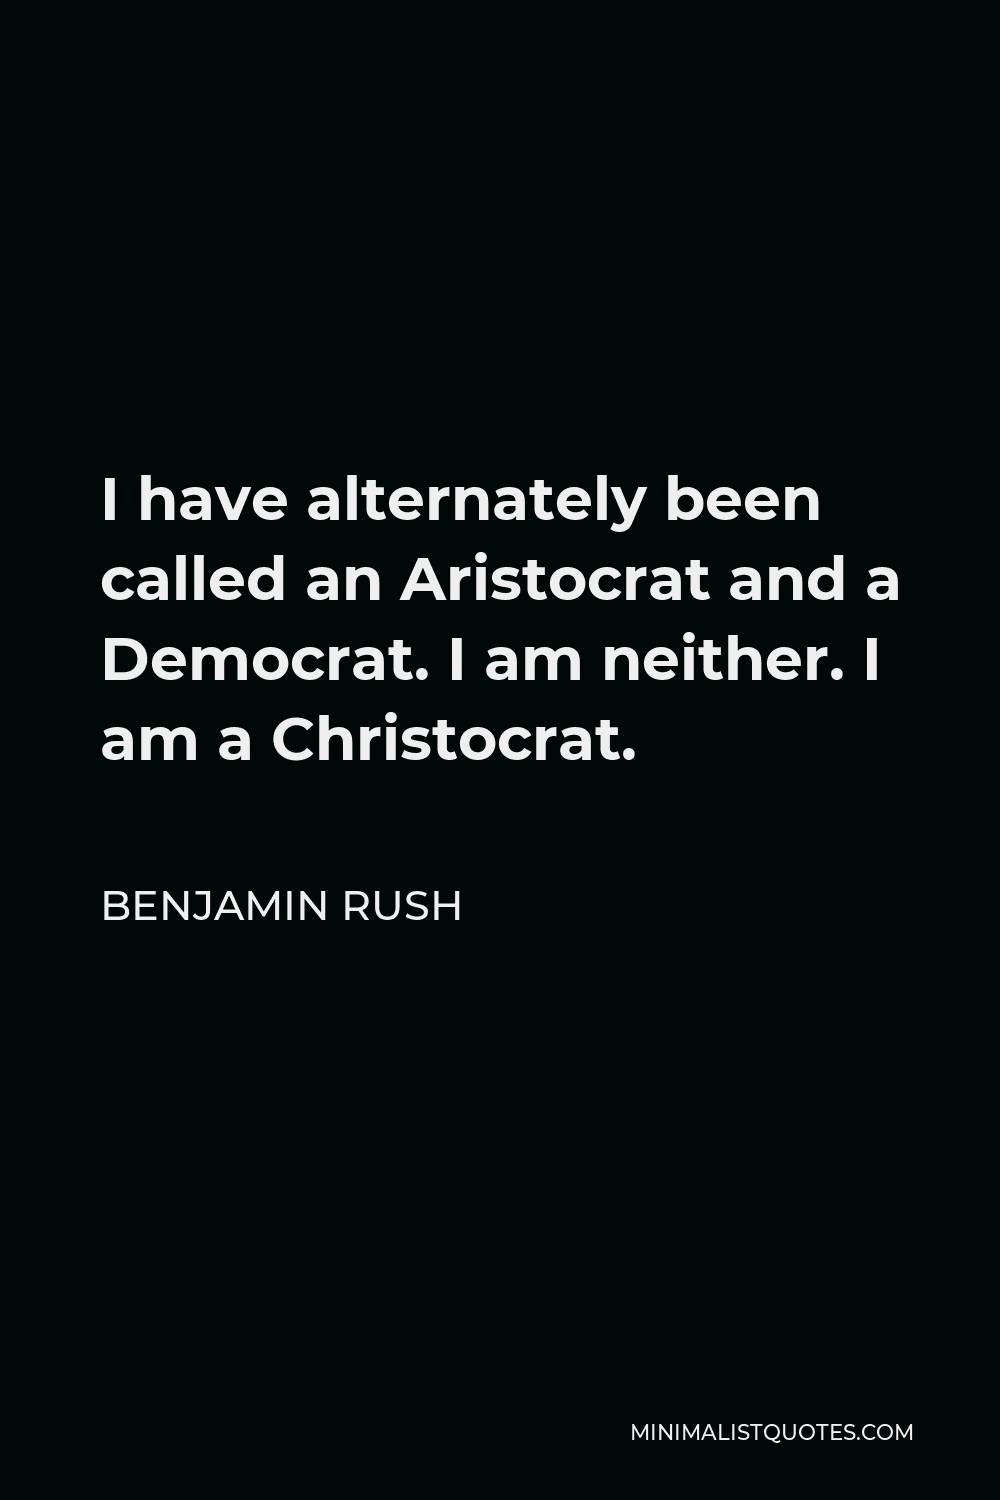 Benjamin Rush Quote - I have alternately been called an Aristocrat and a Democrat. I am neither. I am a Christocrat.